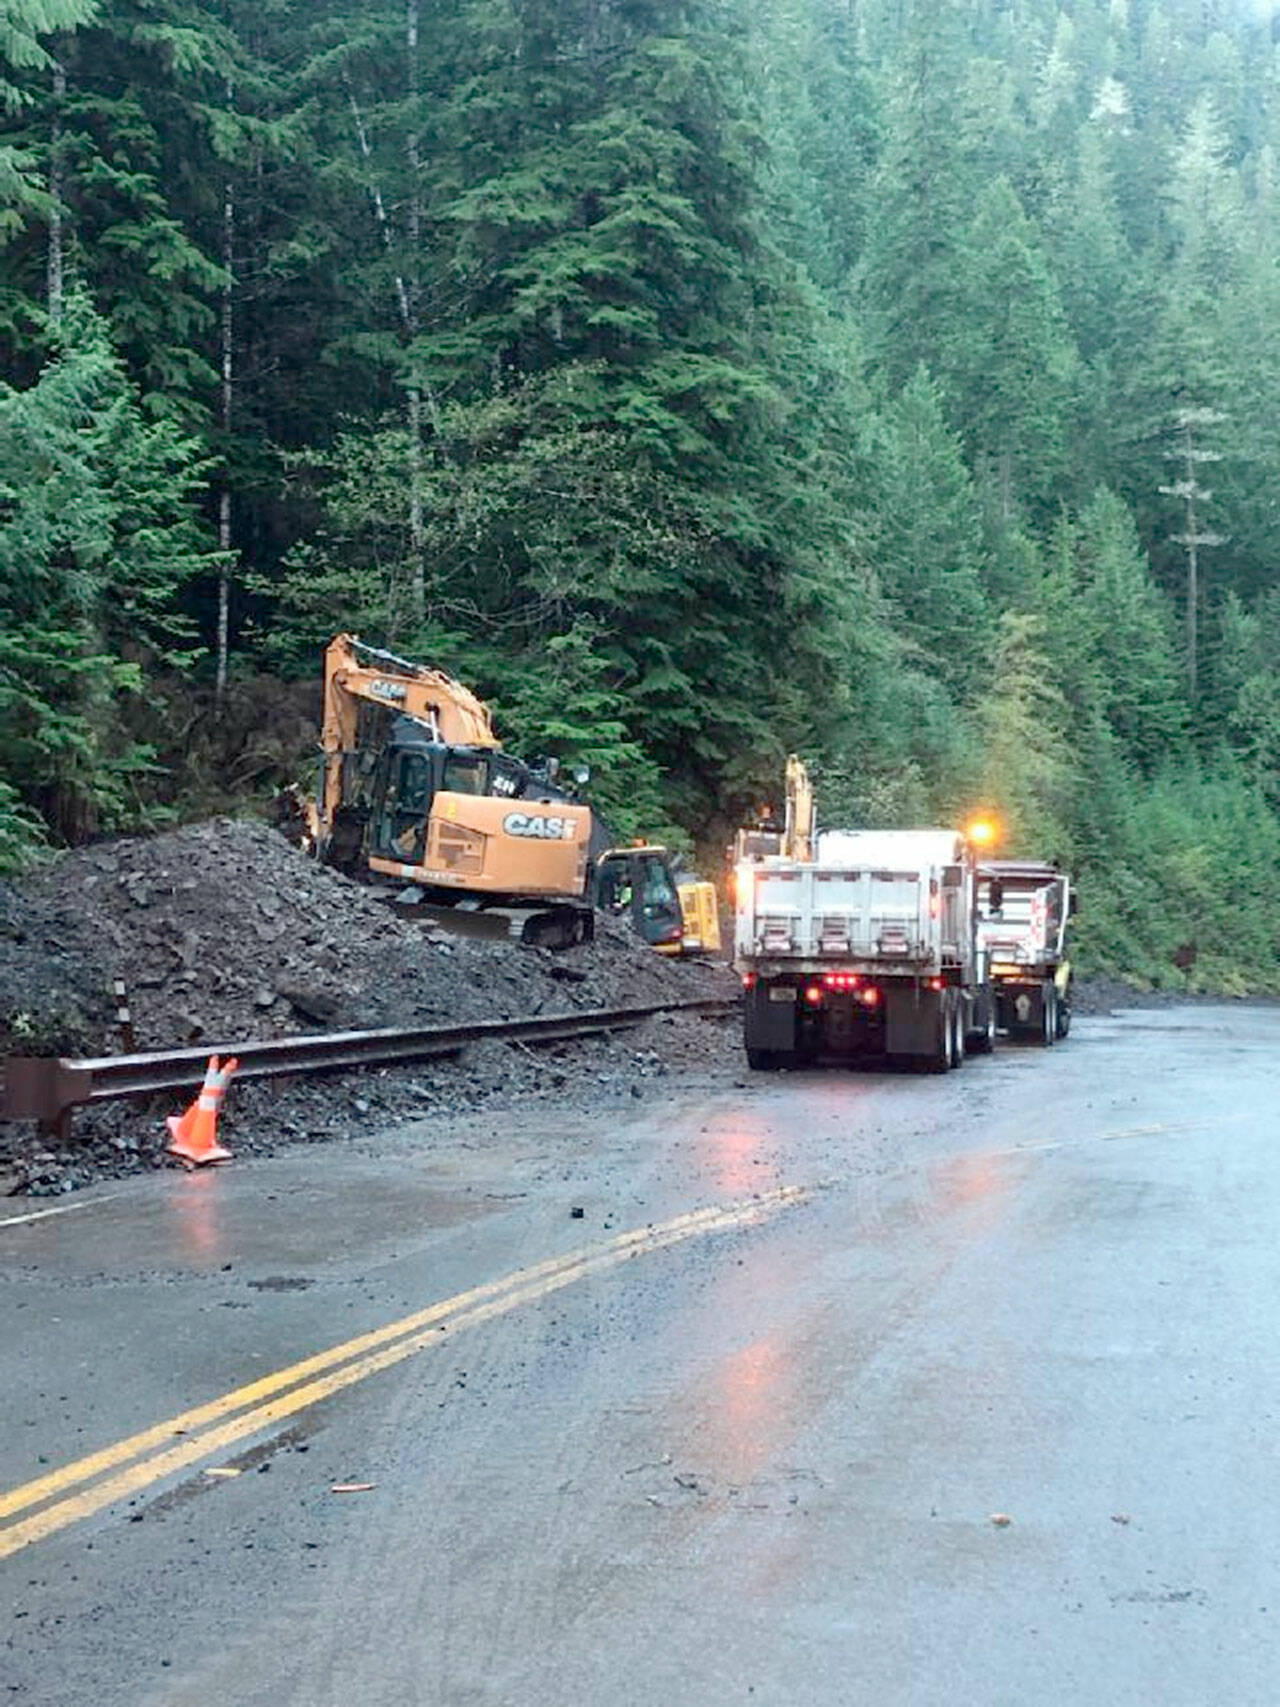 U.S. Highway 101 has reopened fully at Lake Crescent after state Department of Transportation maintenance crews cleared debris from three slides caused by Monday’s storms. (State Department of Transportation)